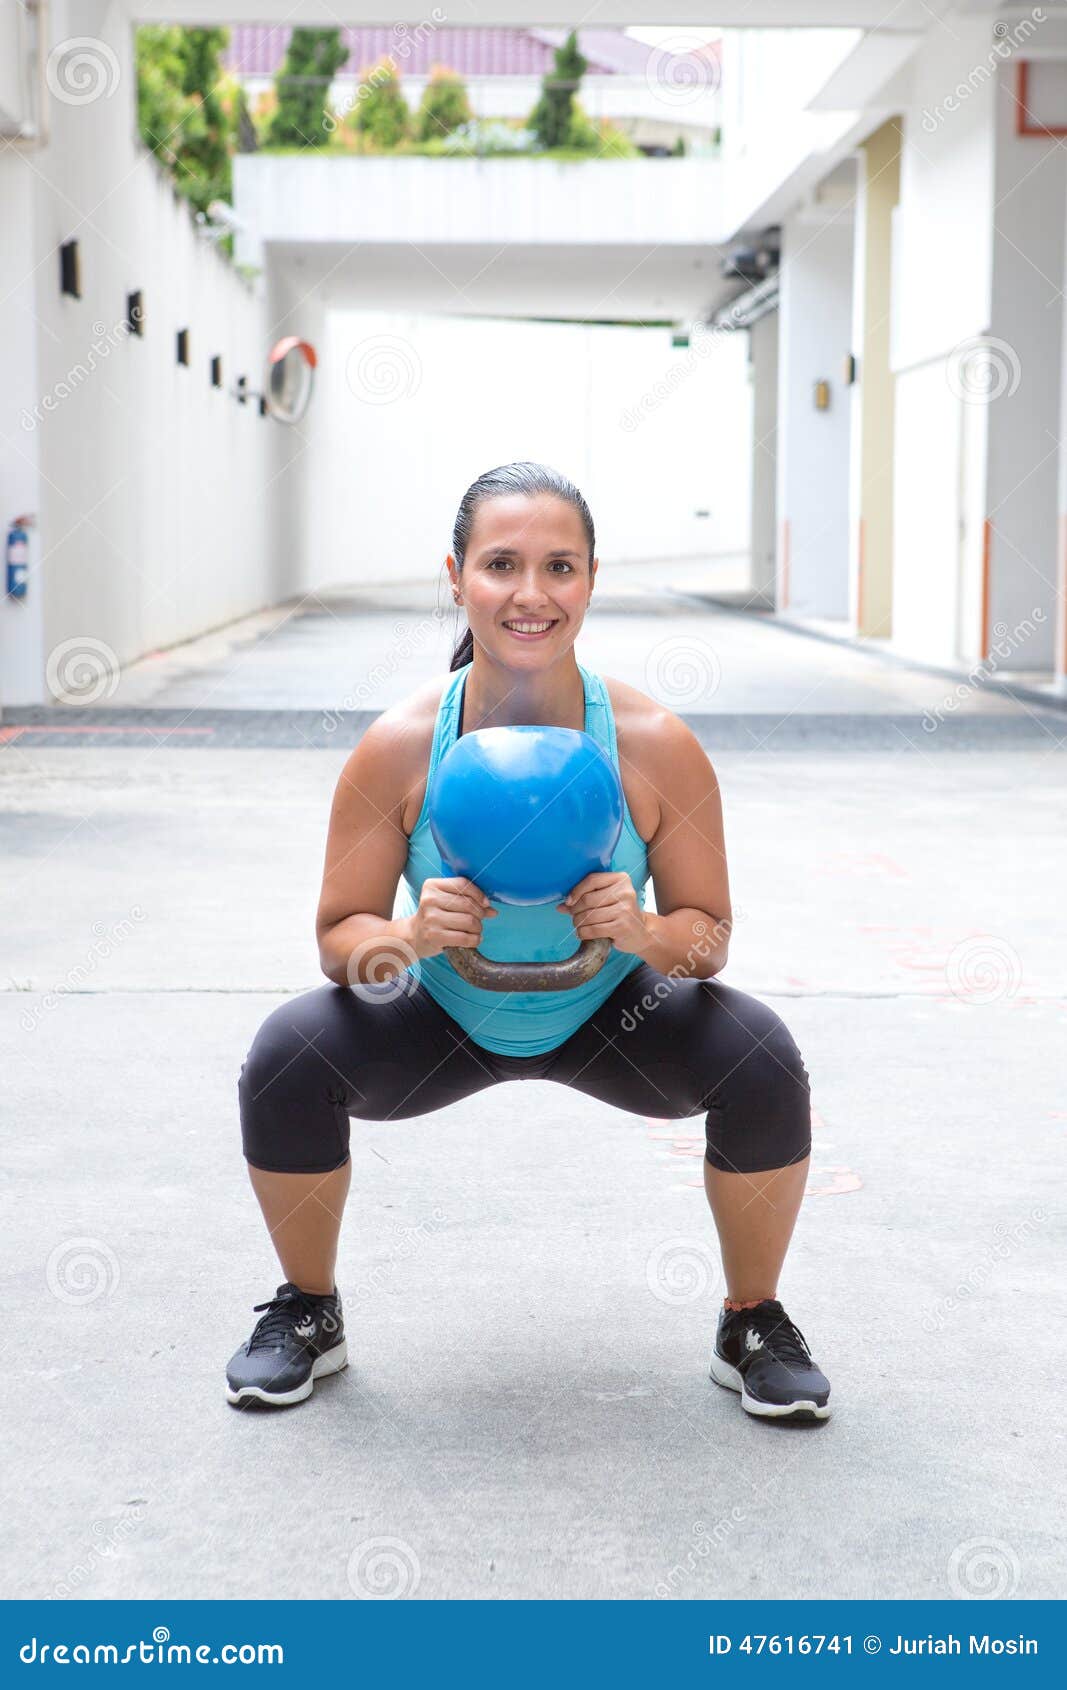 woman doing the kettlebell squat for muscle strengthening exercise